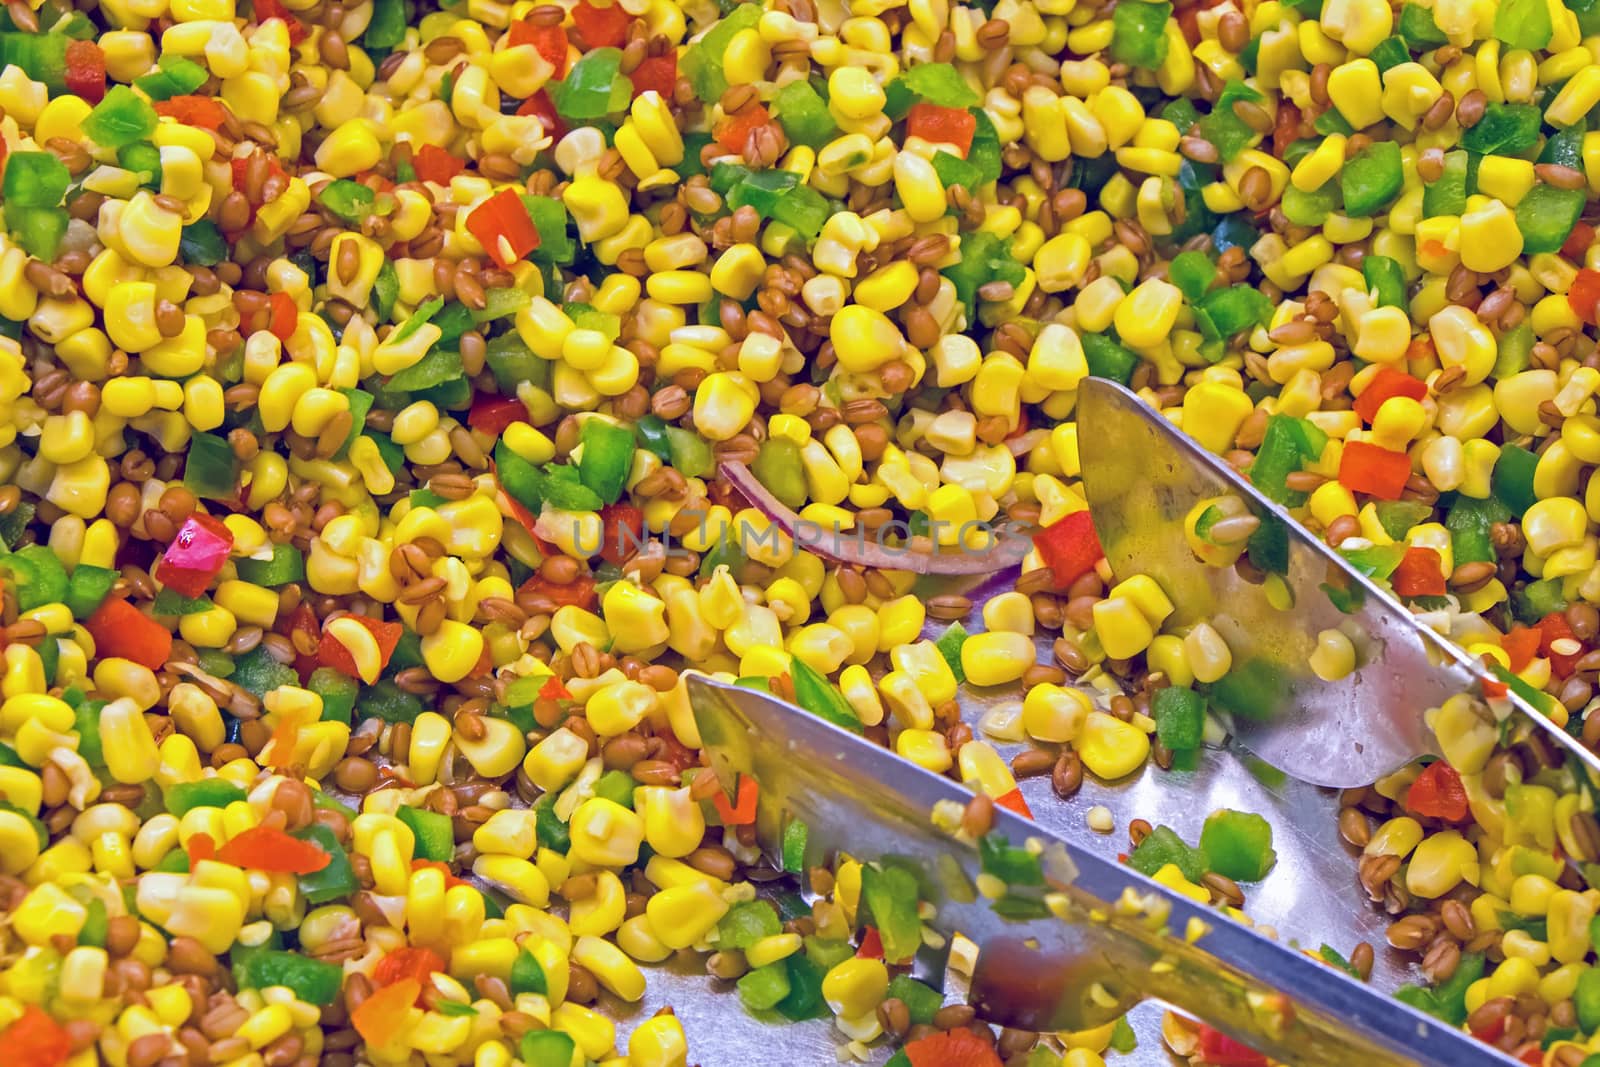 Salad with corn and paprika seen at a buffet